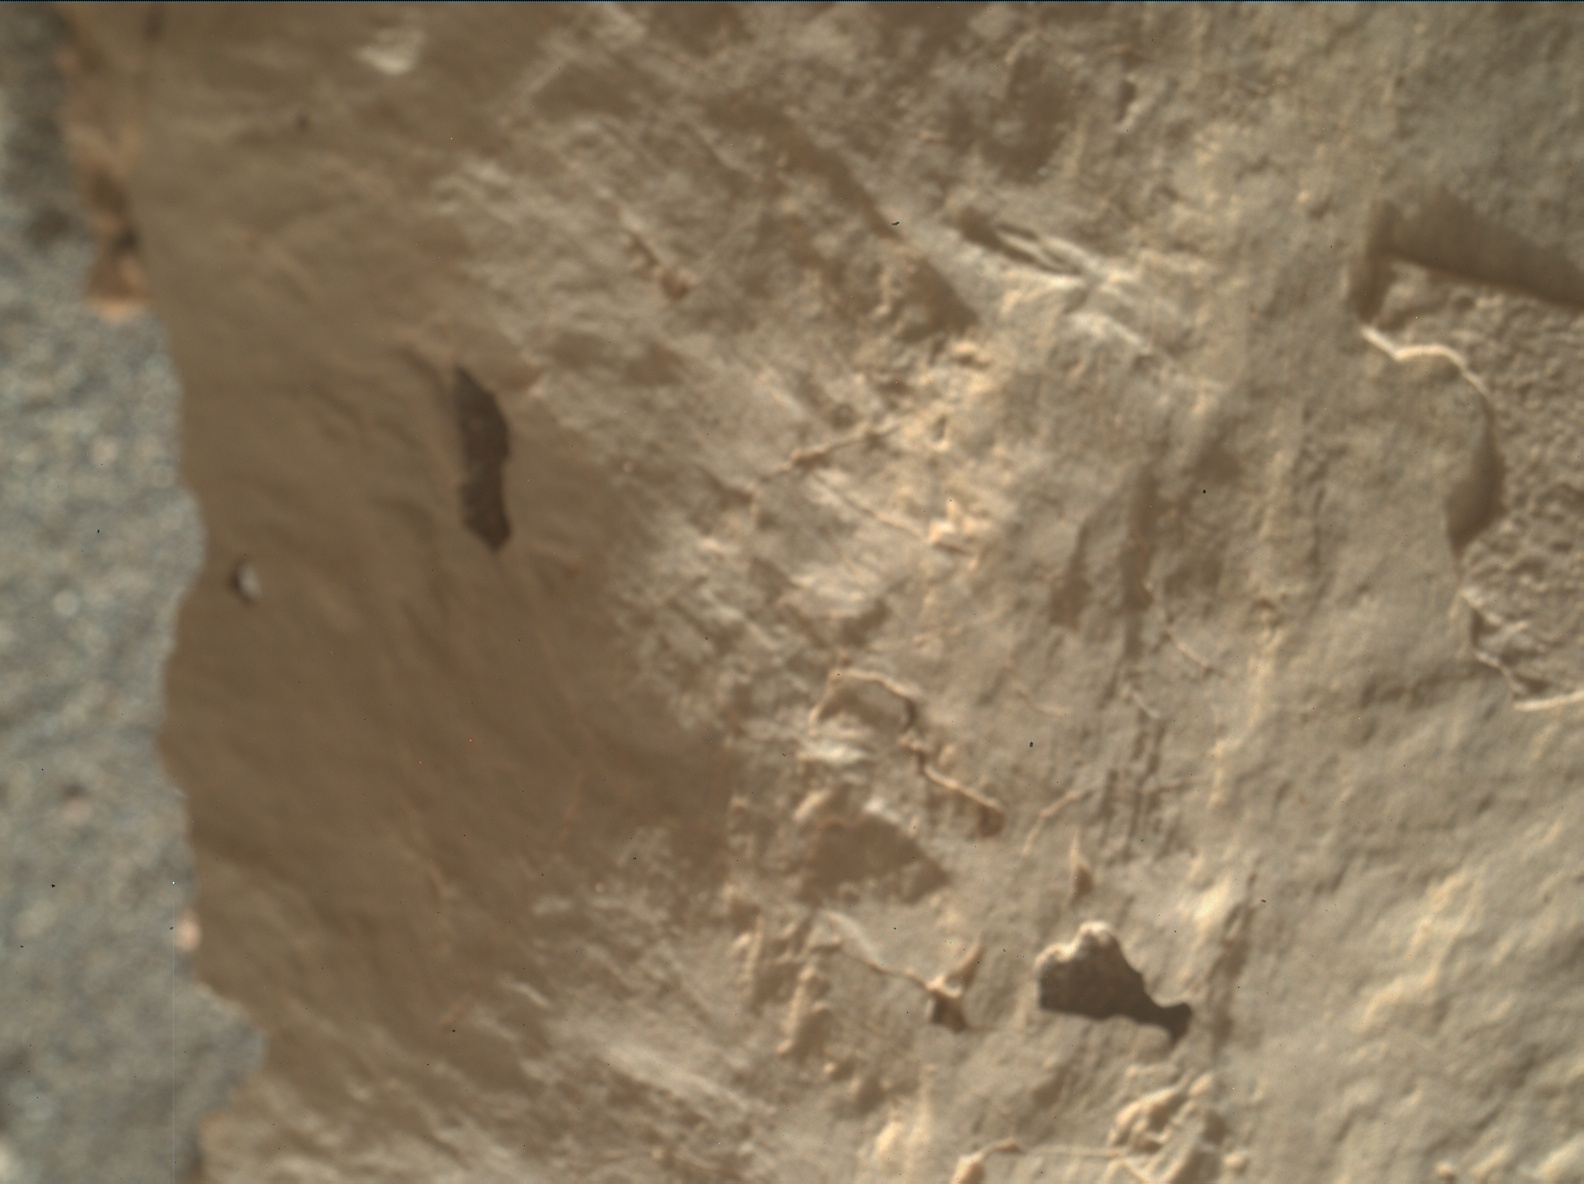 Nasa's Mars rover Curiosity acquired this image using its Mars Hand Lens Imager (MAHLI) on Sol 3142